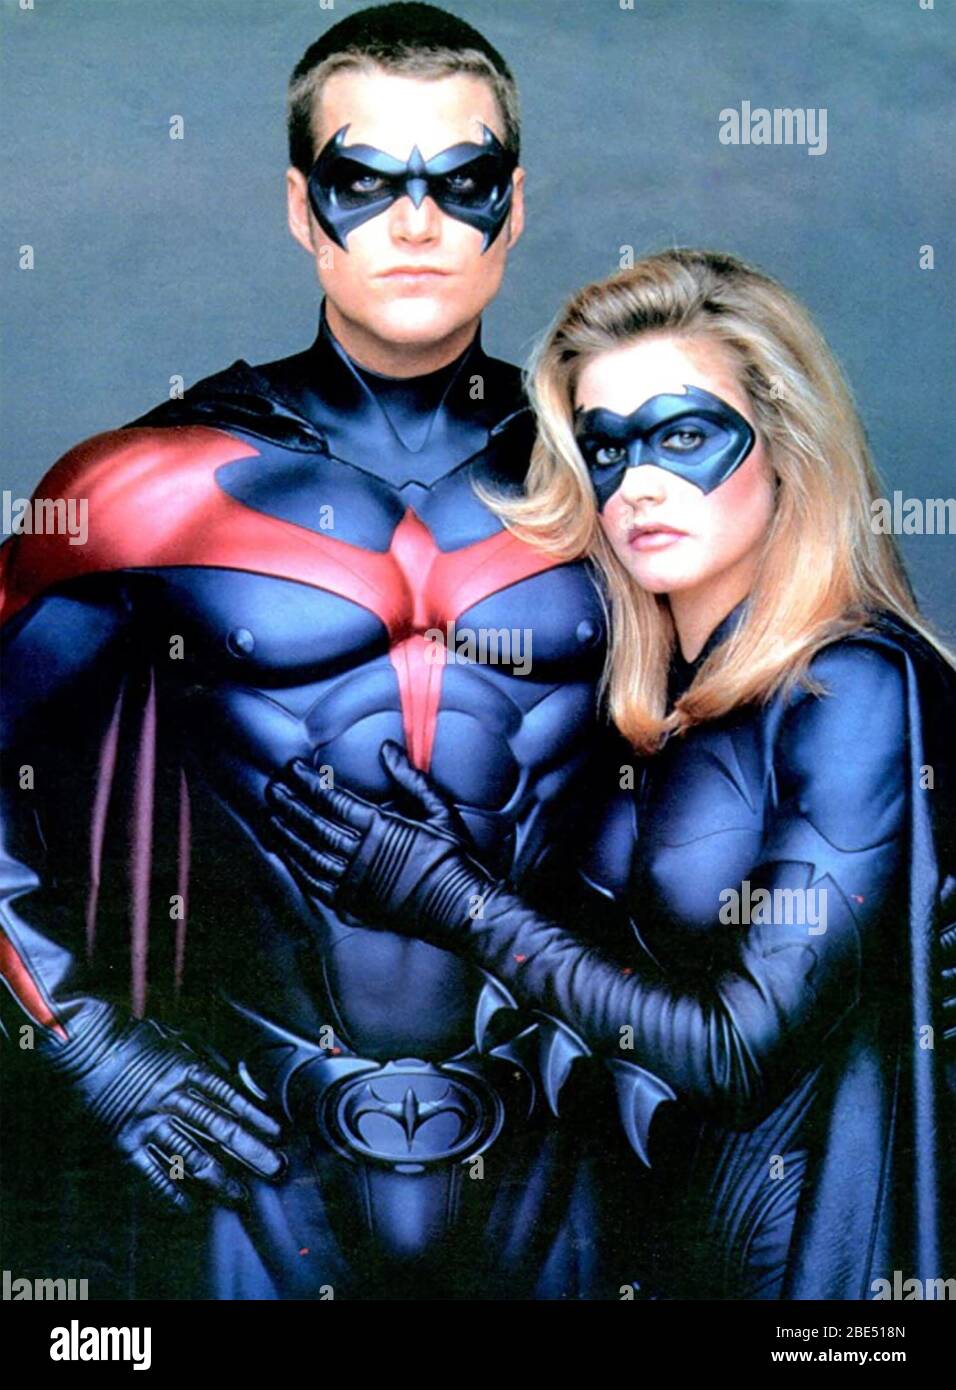 BATMAN AND ROBIN 1997 Warner Bros film with Alicia Silverstone and Chris O'Donnell Stock Photo